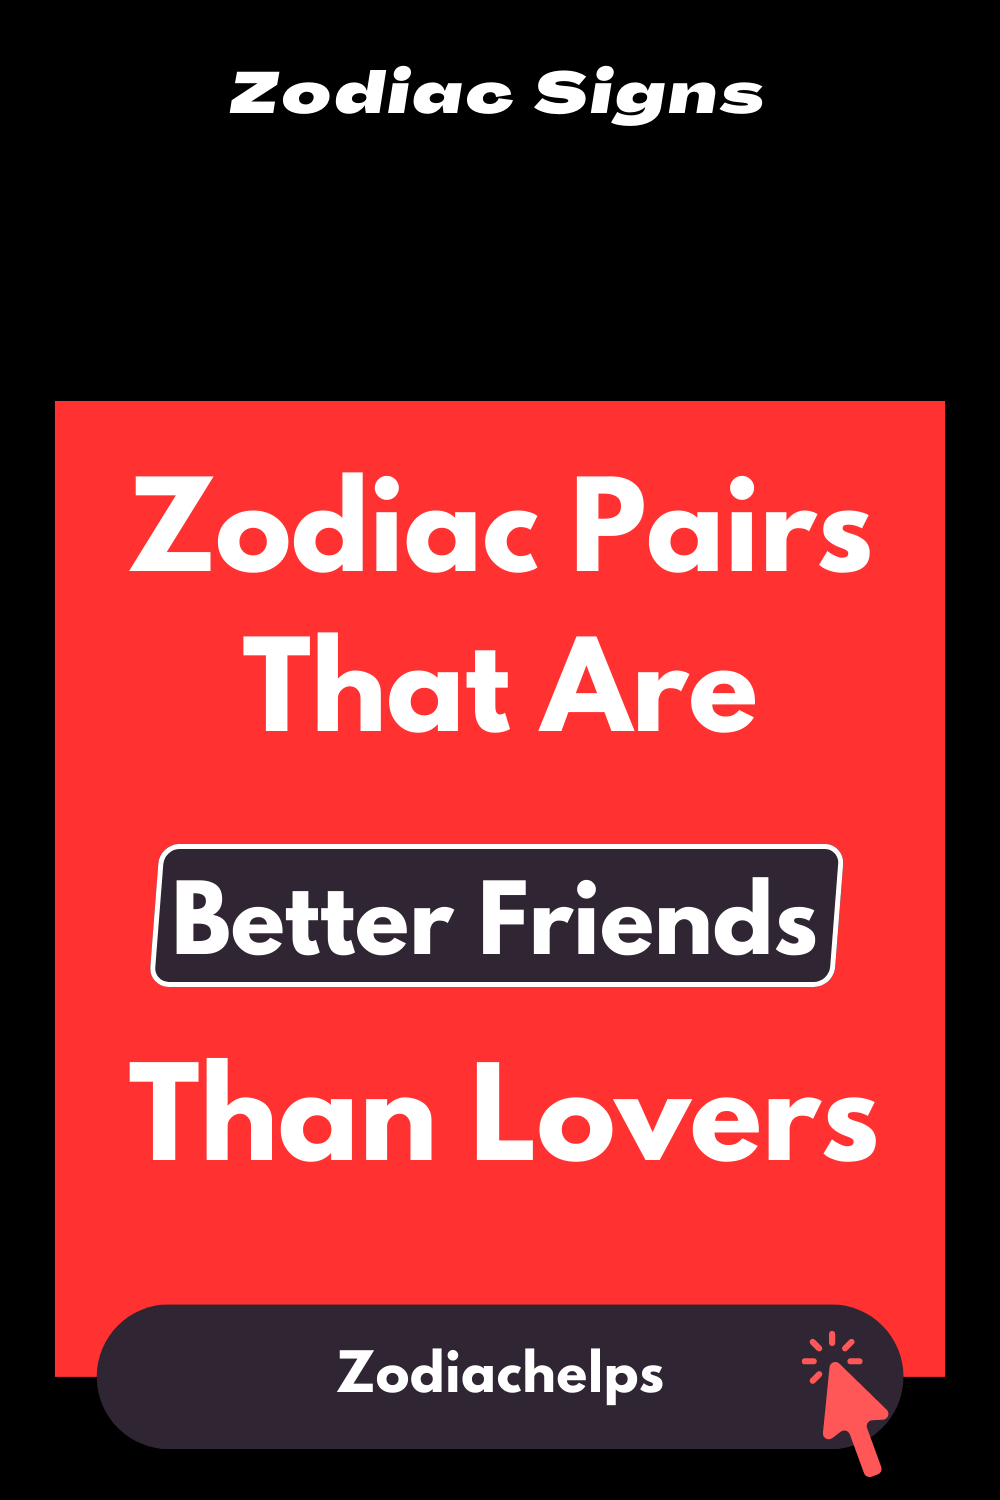 Zodiac Pairs That Are Better Friends Than Lovers